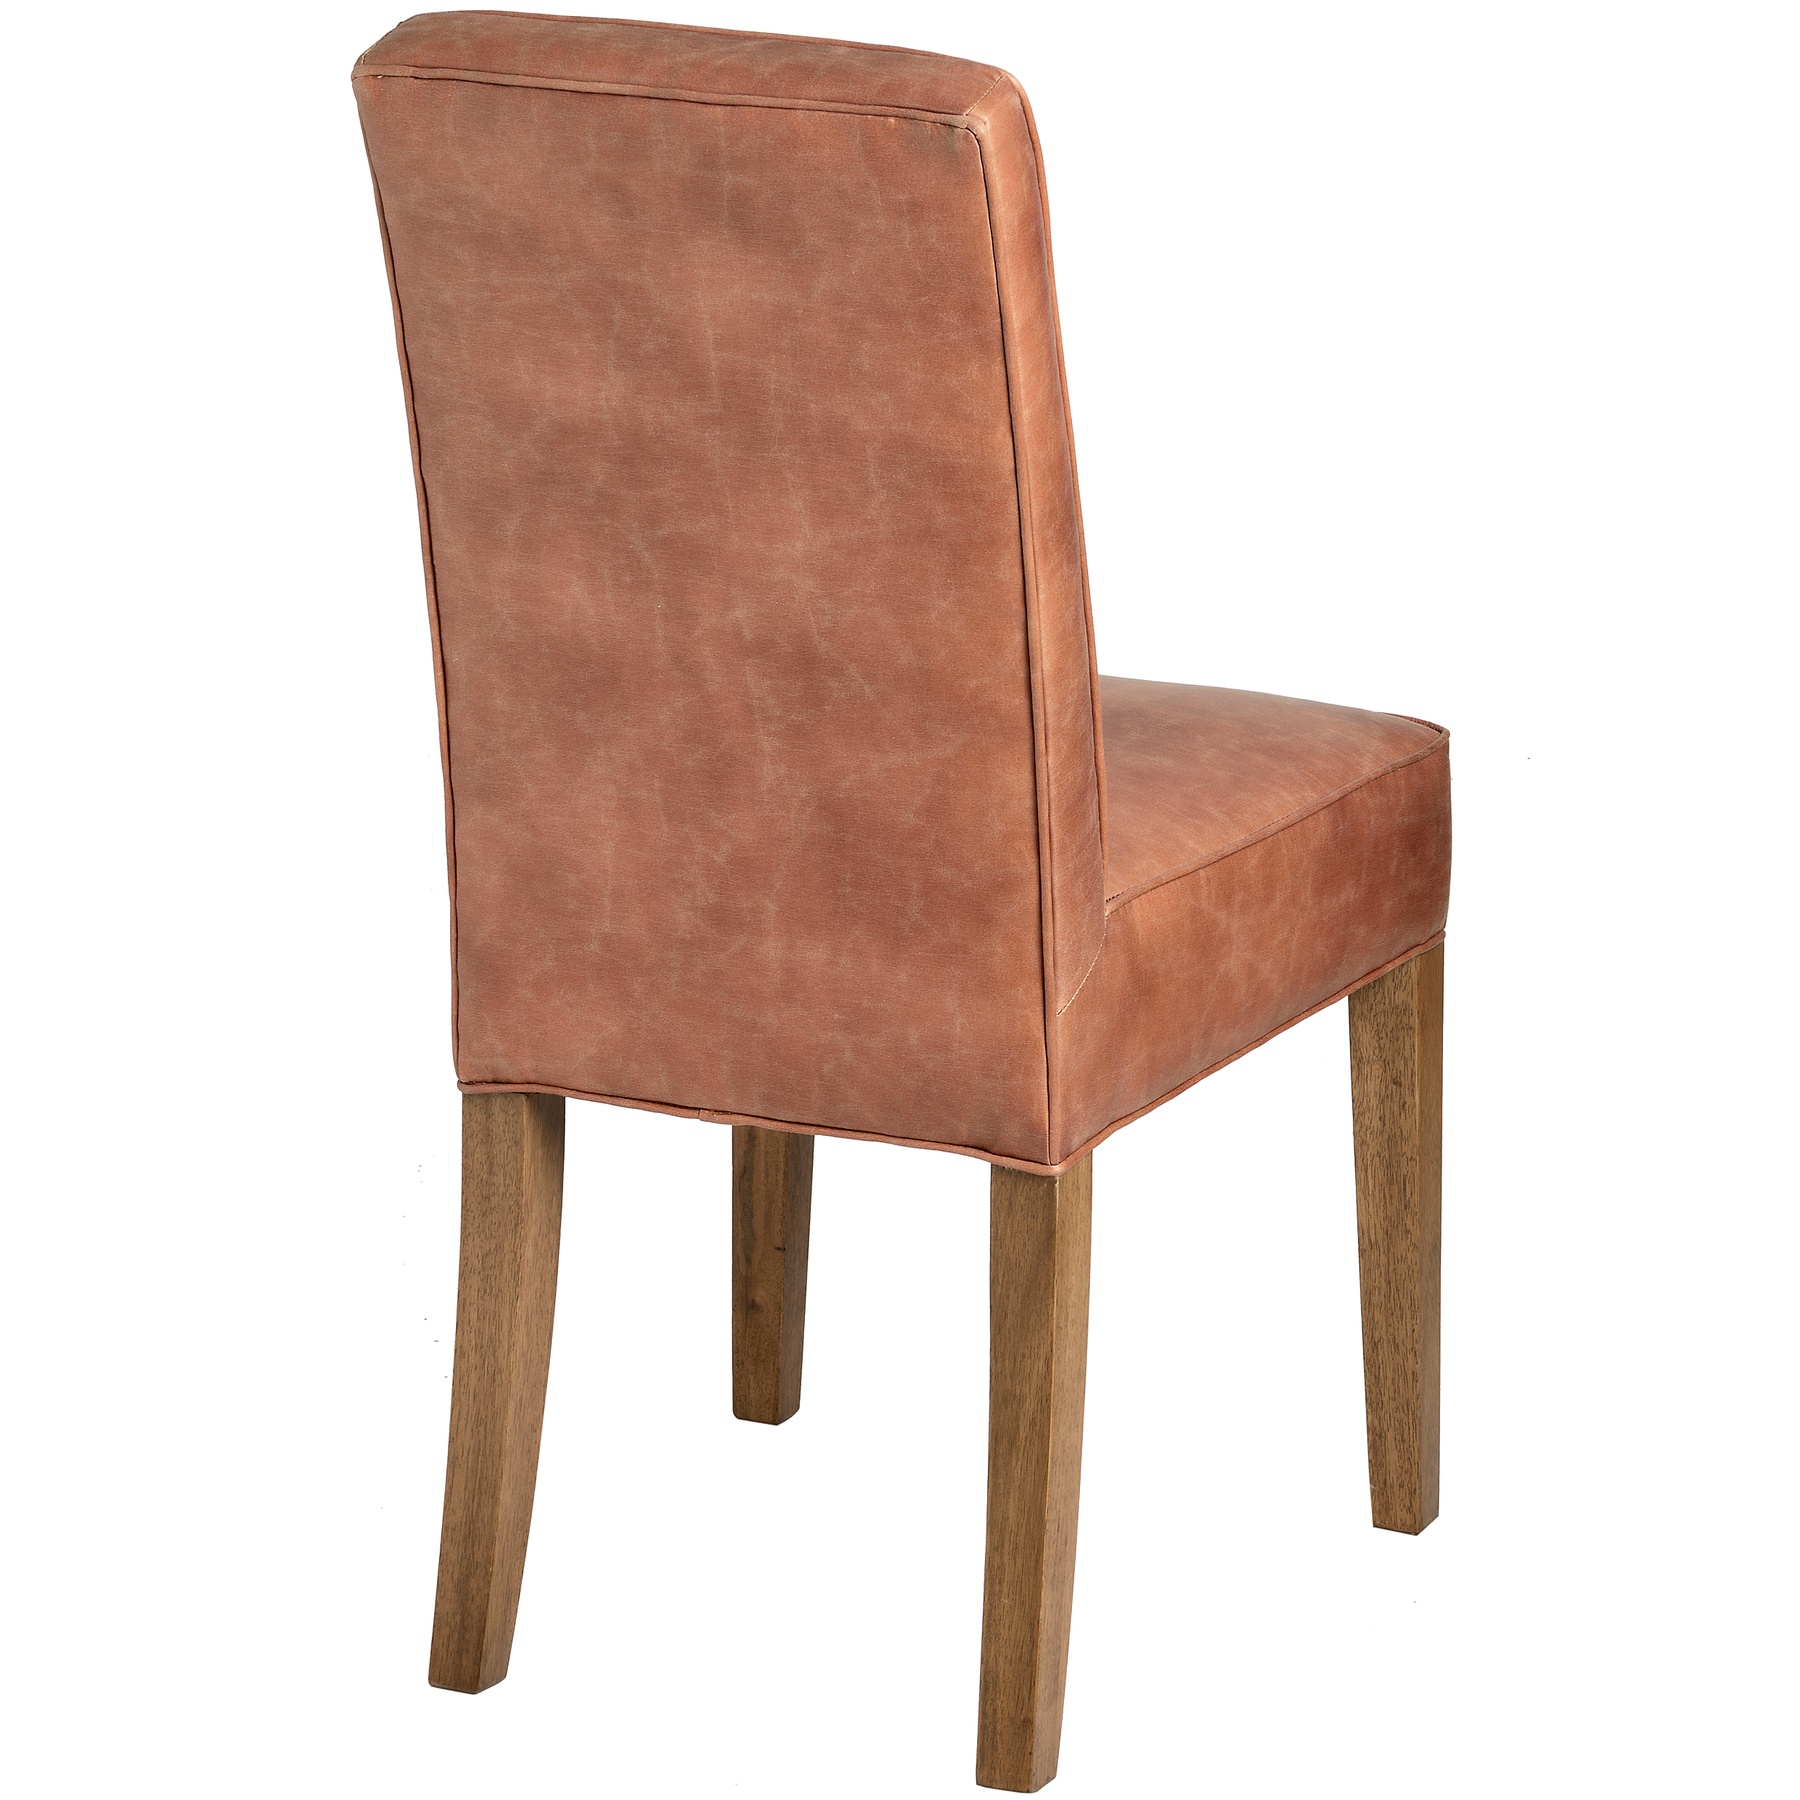 Tan Faux Leather Dining Chair - Image 2